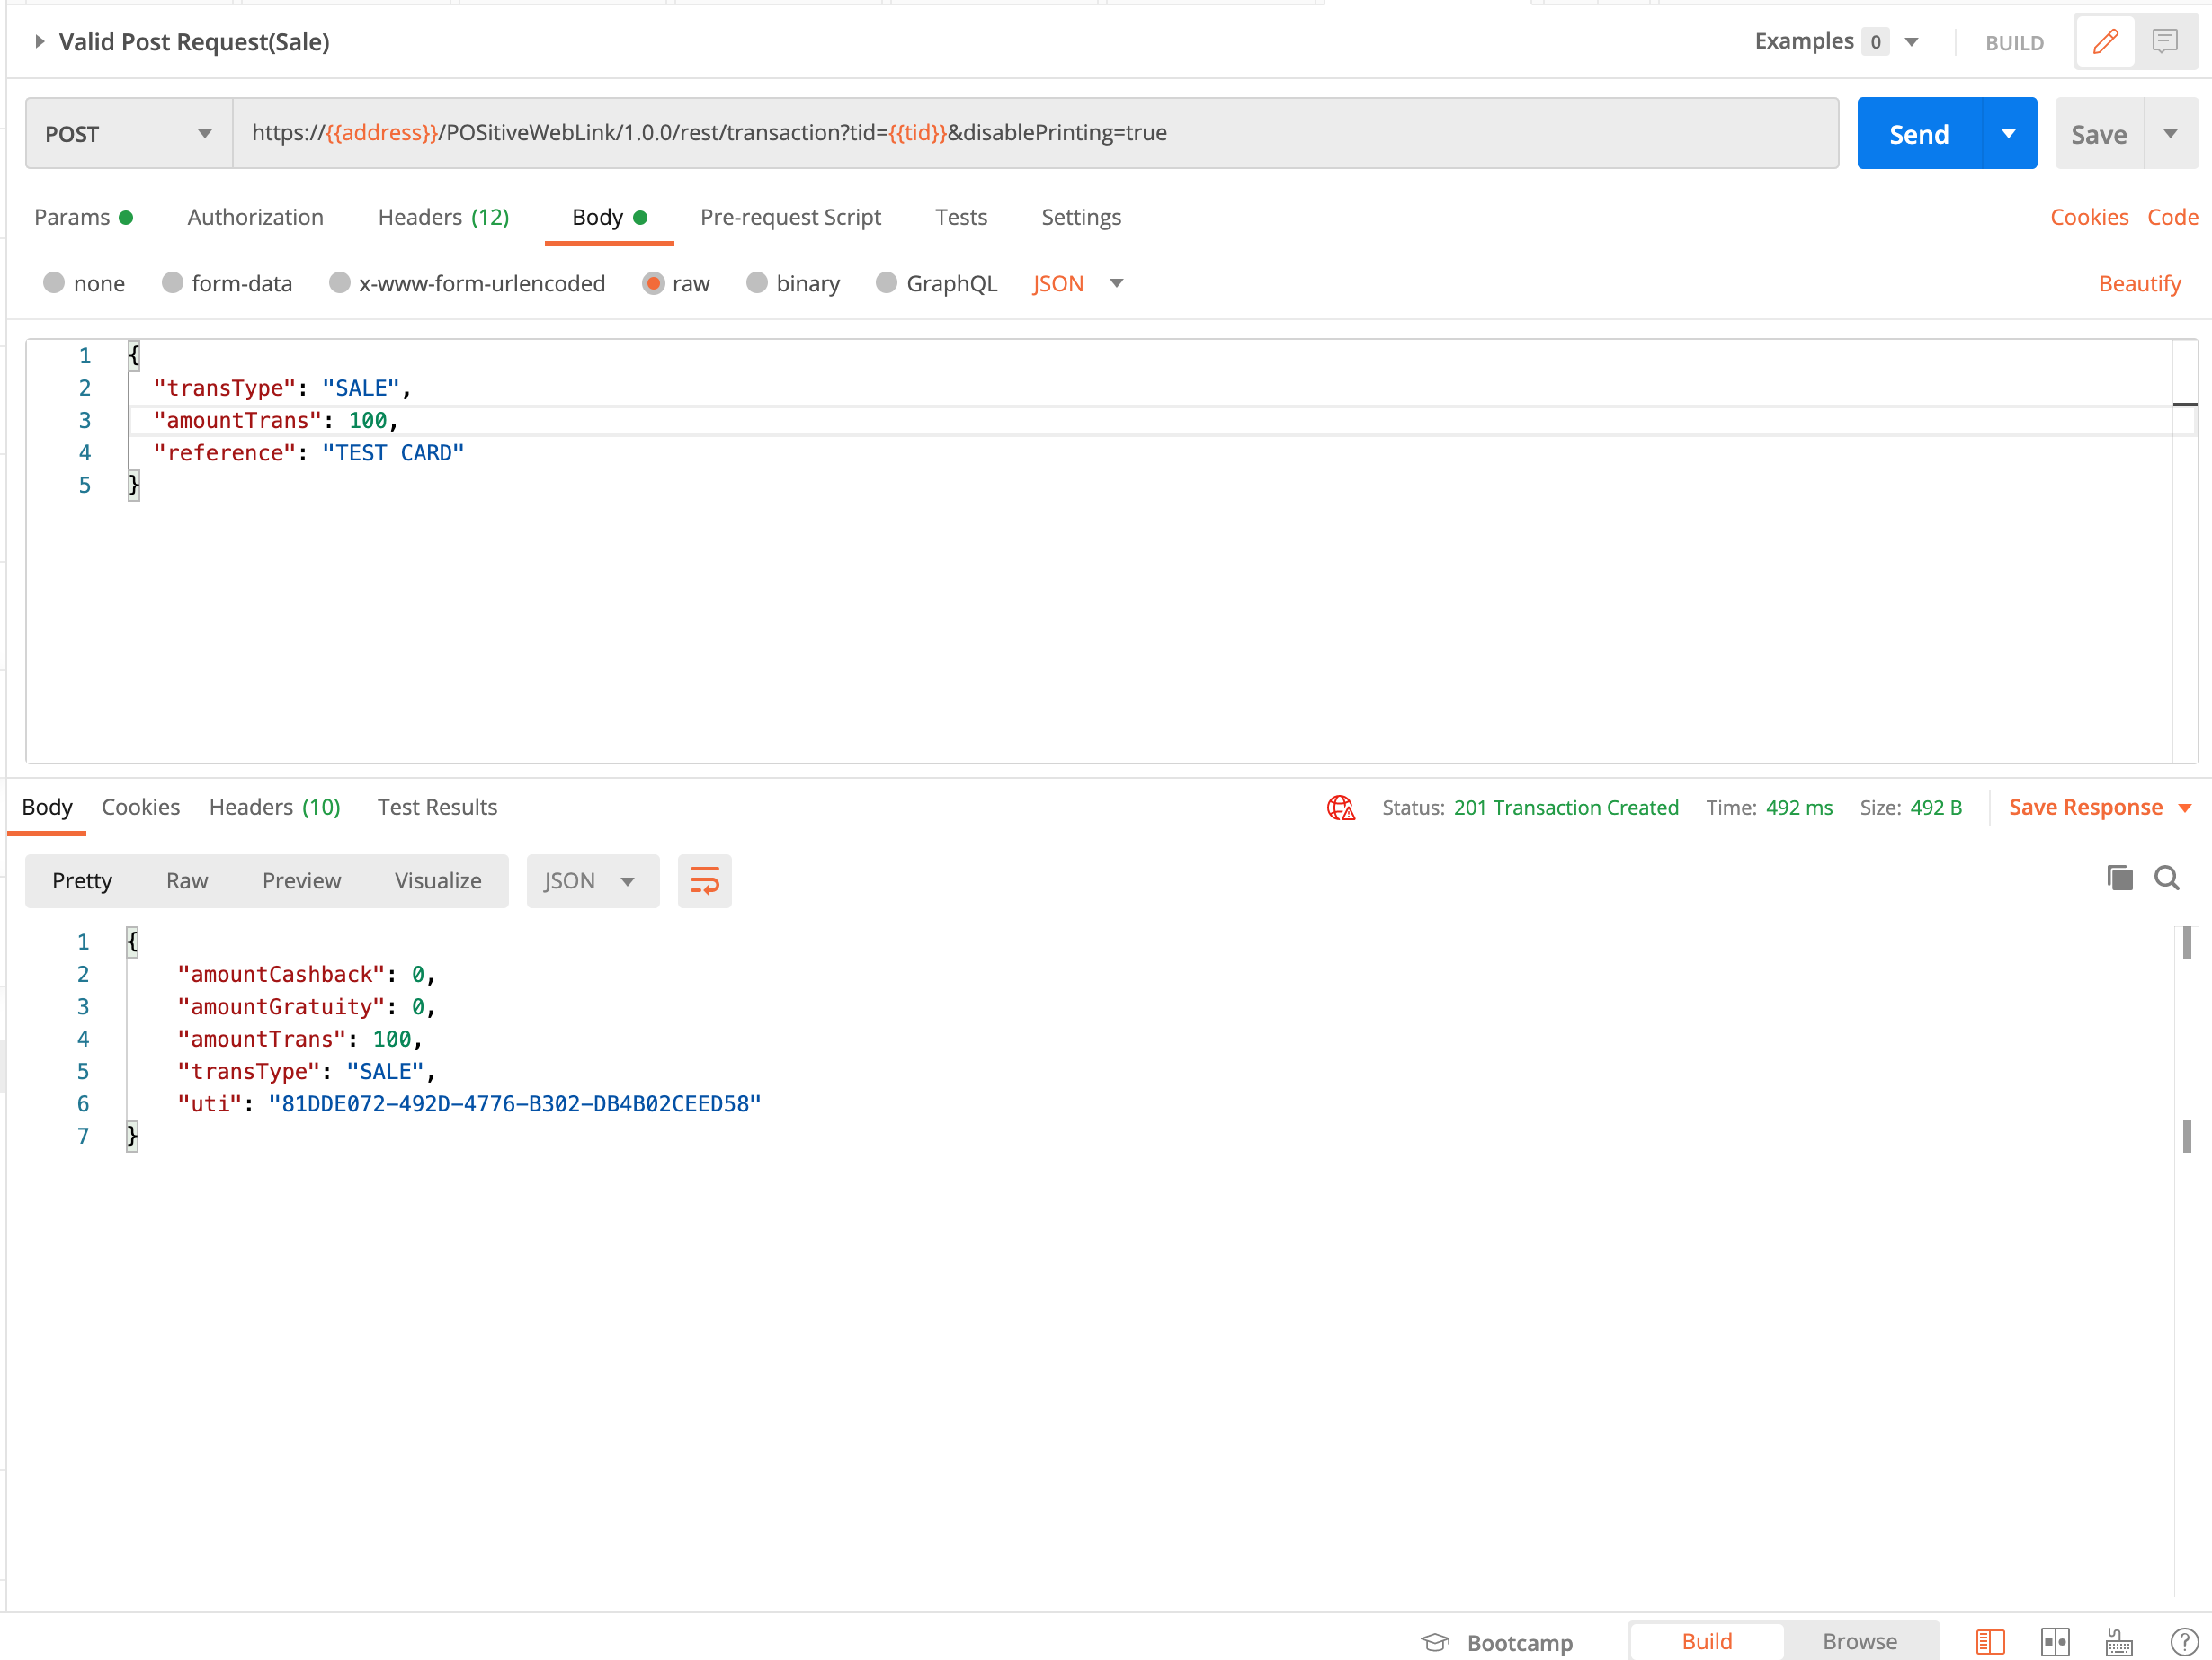 Now you can start testing with postman